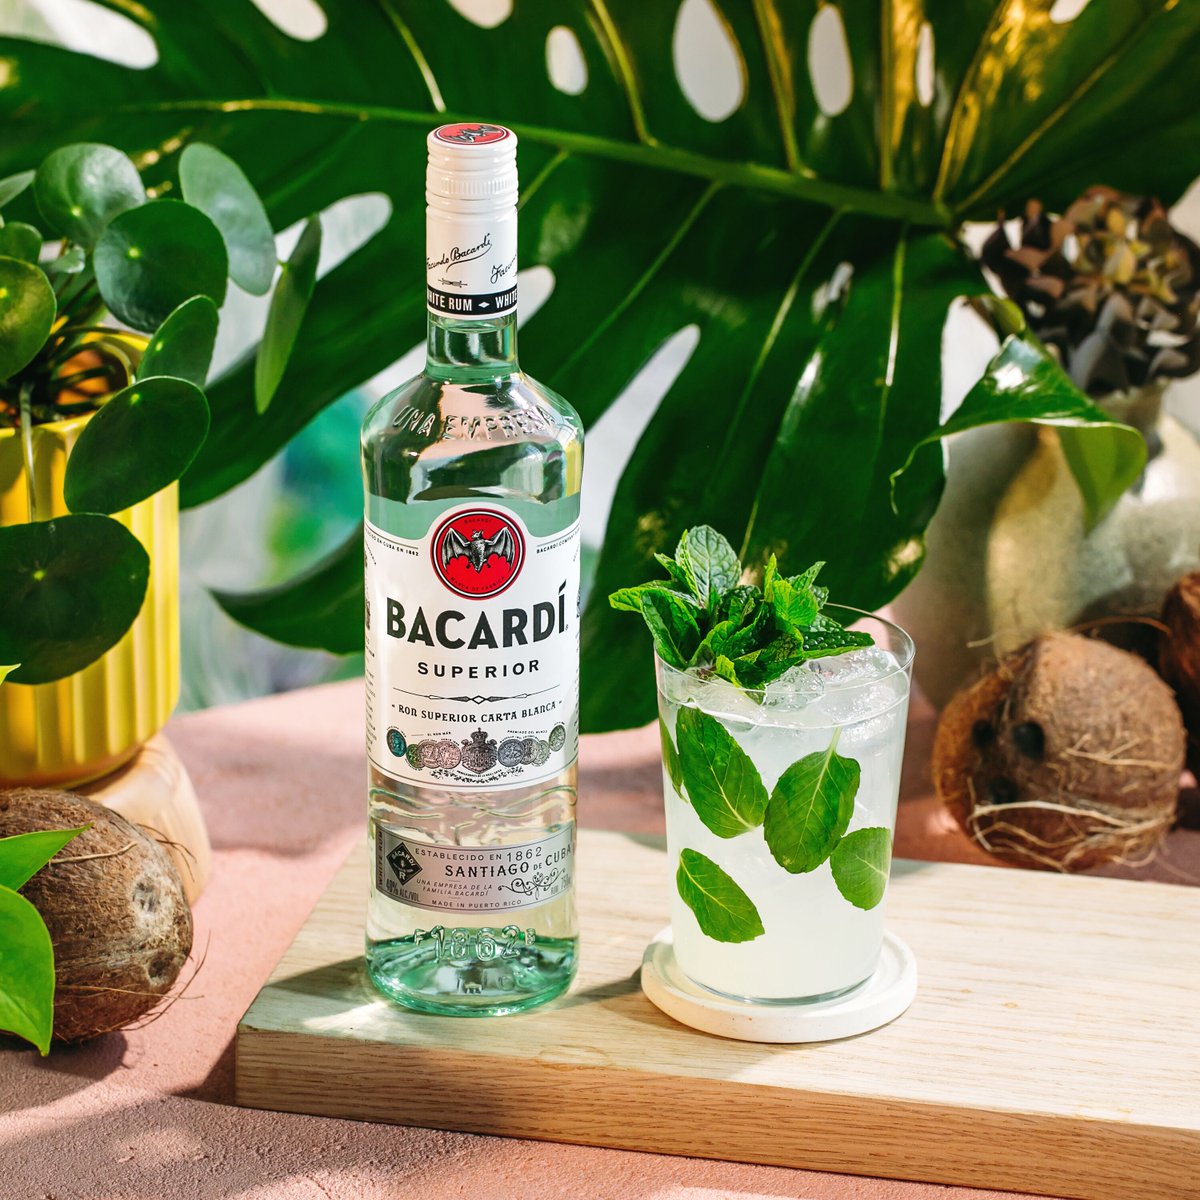 The leaves are getting so green. Just like the mint leaves in a refreshing #BACARDI Mojito. -2 parts #BACARDI Rum -1 part lime juice -12 fresh mint leaves -2 tsp extra fine sugar -1 part club soda -1 mint sprig #DoWhatMovesYou